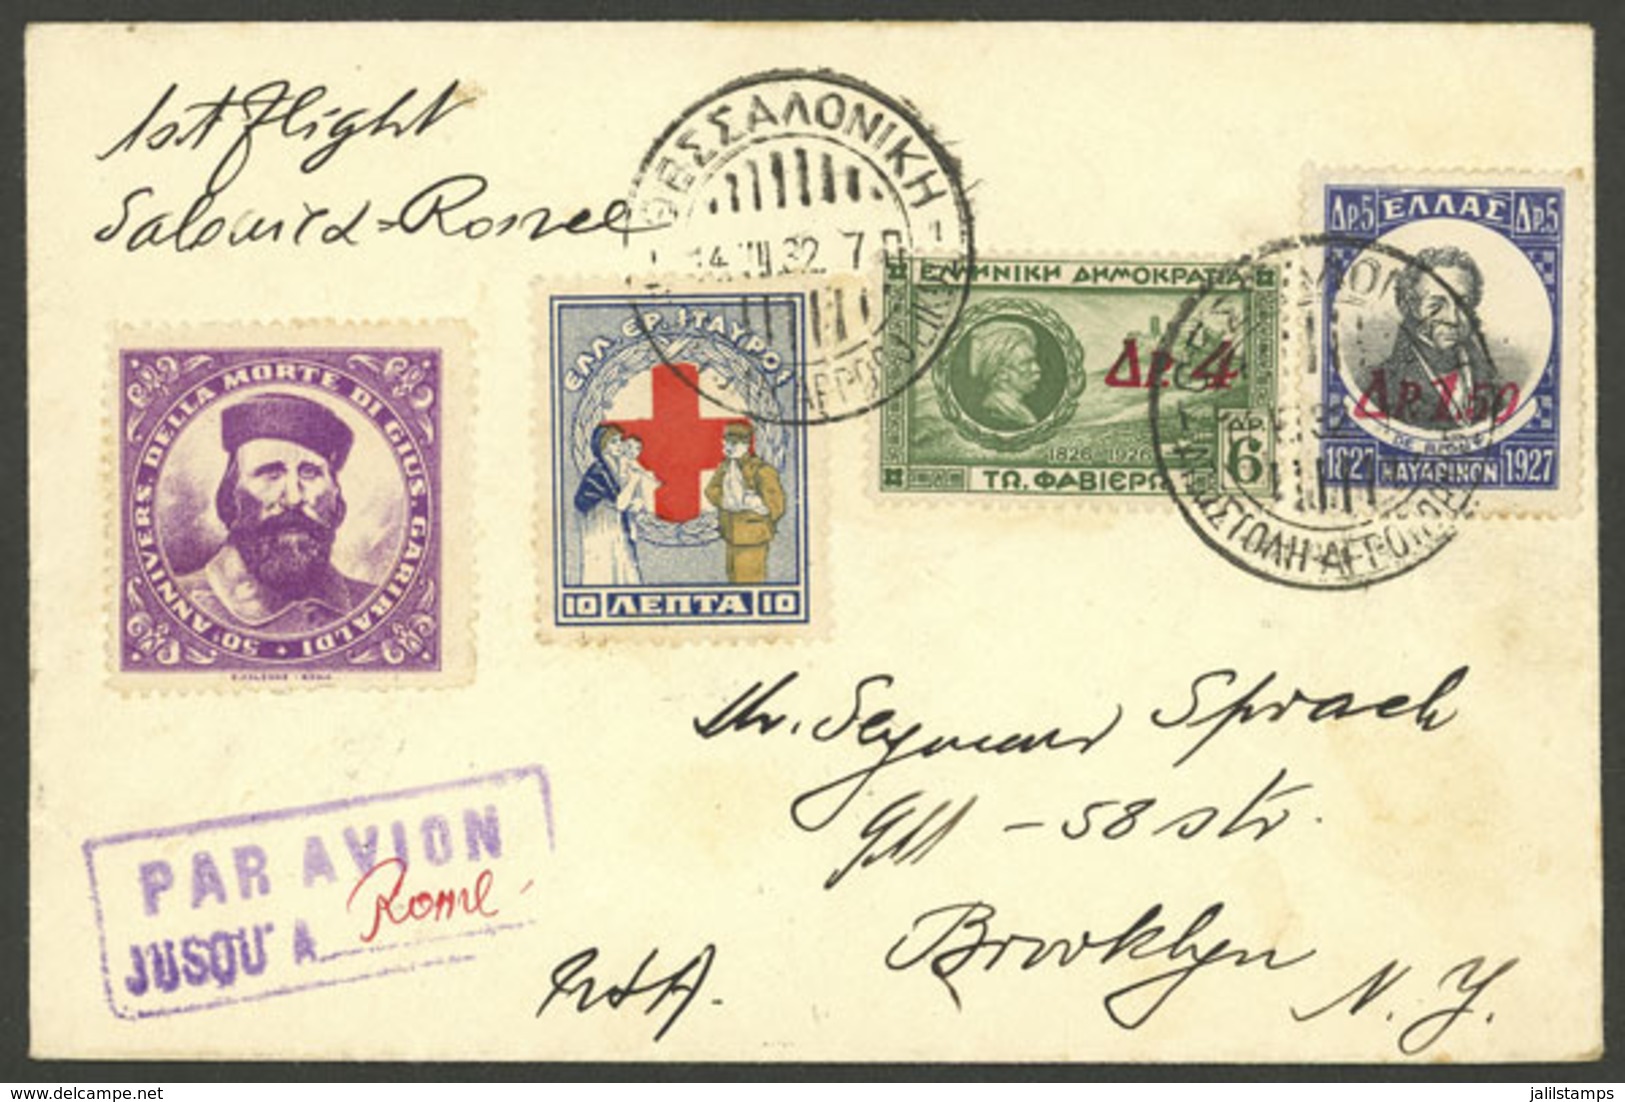 GREECE: 14/JUL/1932 First Flight Salonica - Roma By S.A.M., Cover Of Fine Quality, Scarce, Only 42 Letters Were Carried  - Briefe U. Dokumente